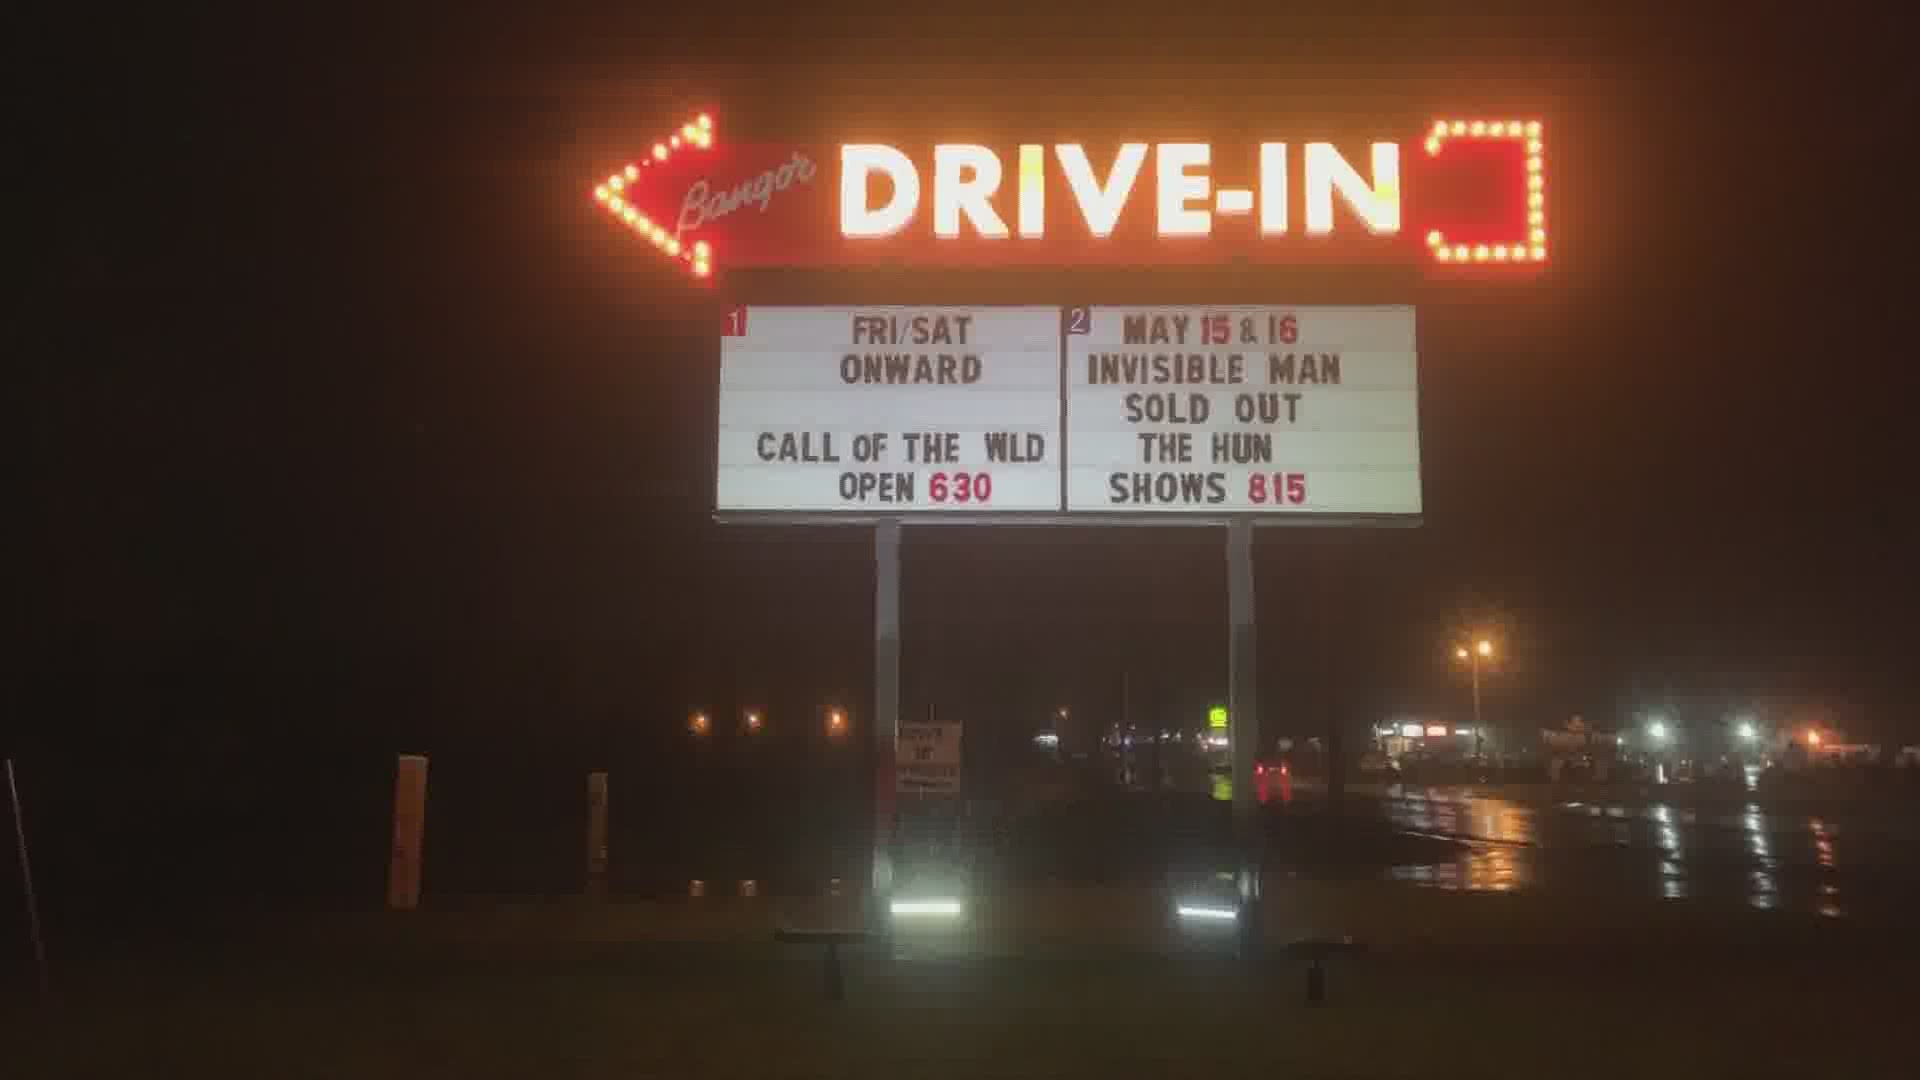 As small businesses start to slowly re-open...this weekend most Maine drive-in theaters across the state opened early!